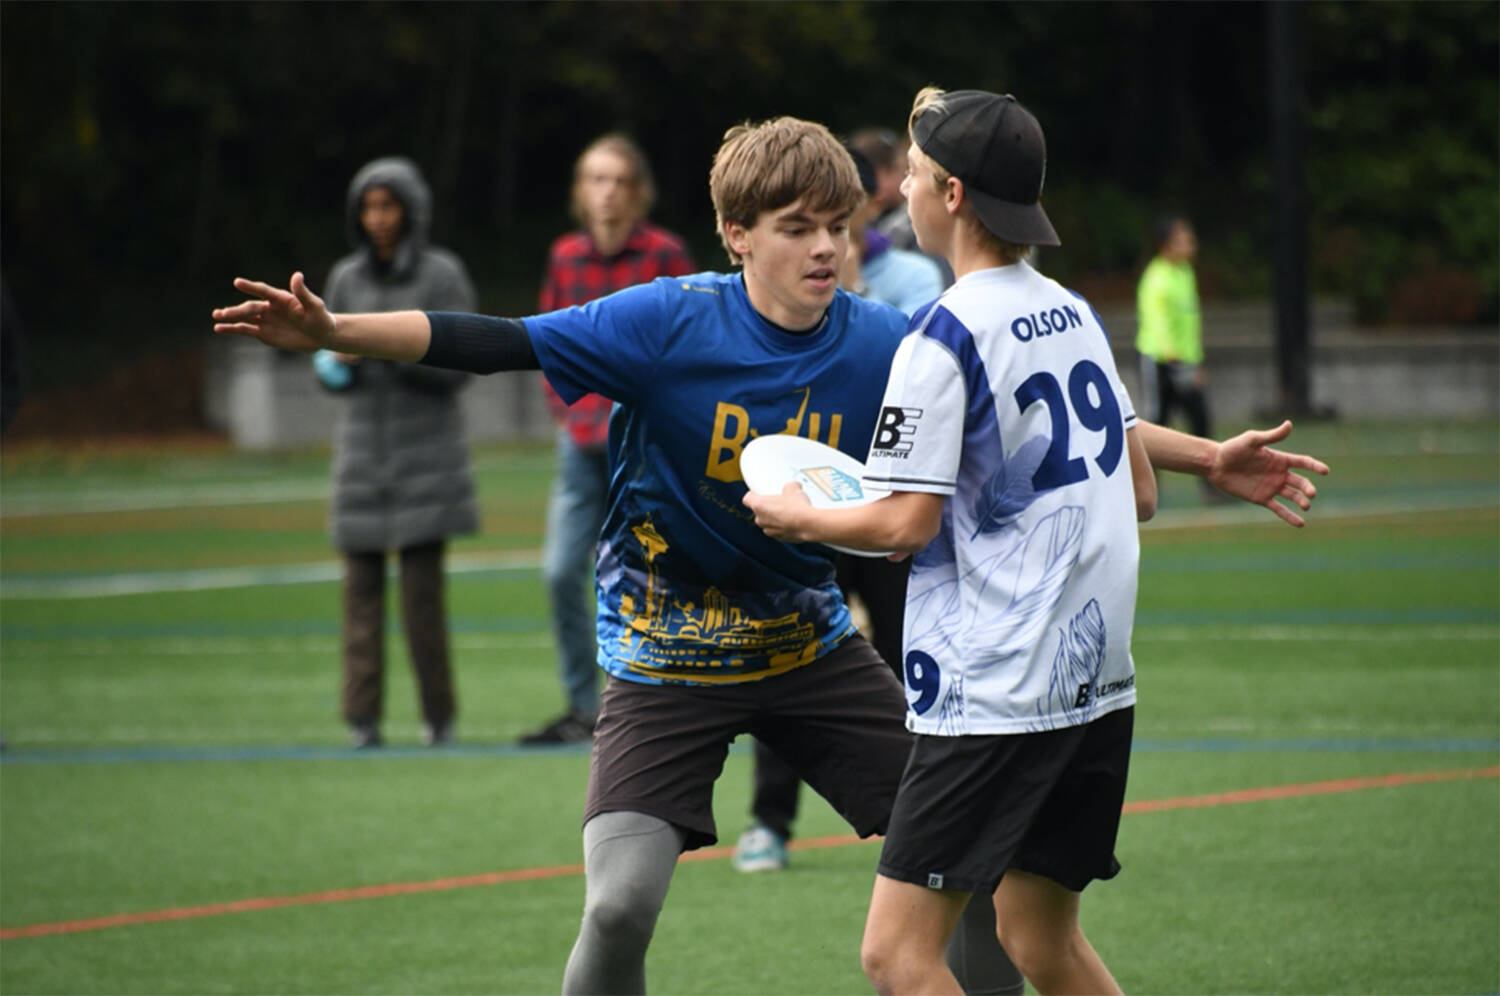 Calder Lange plays tight defense against an Eastside Prep thrower in the Washington State high school Ultimate tournament.